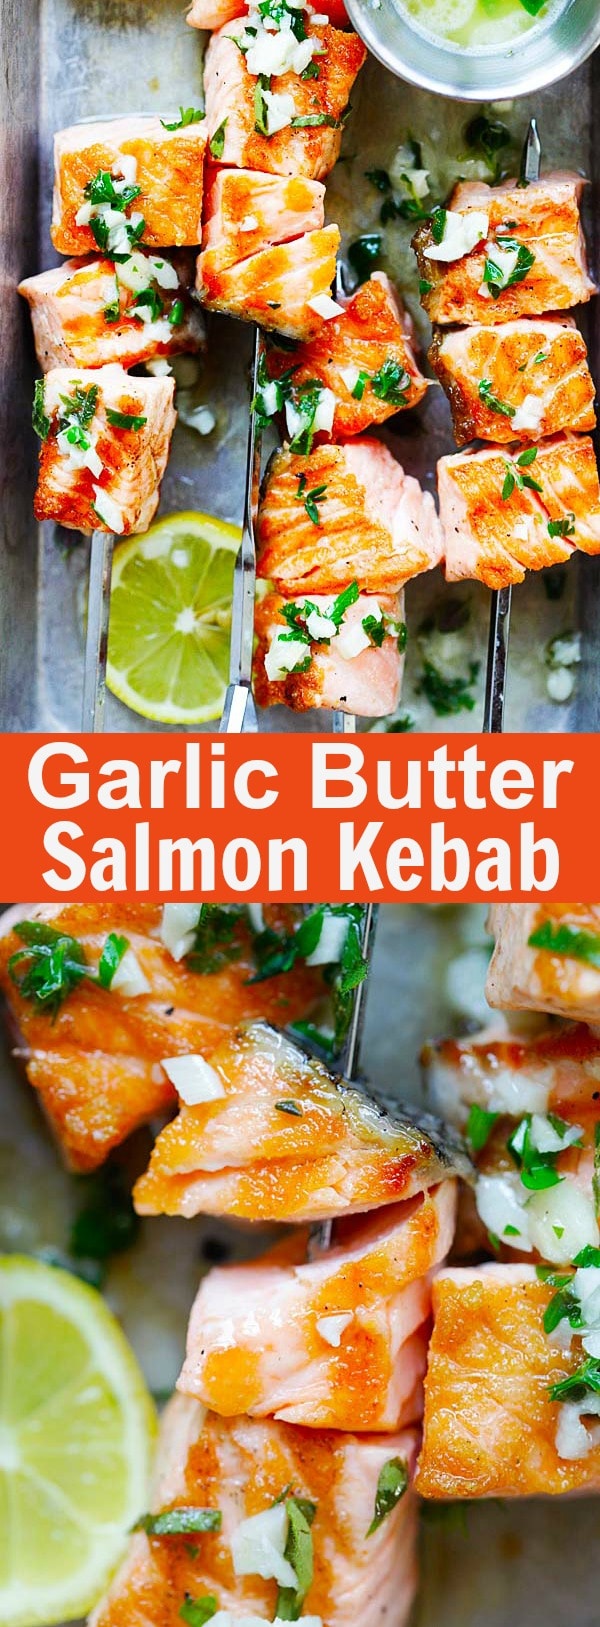 Garlic Butter Salmon Kebab - juicy, succulent and perfectly grilled salmon kebab (kabob) with garlic butter and lemon juice. A guaranteed crowd pleaser | rasamalaysia.com